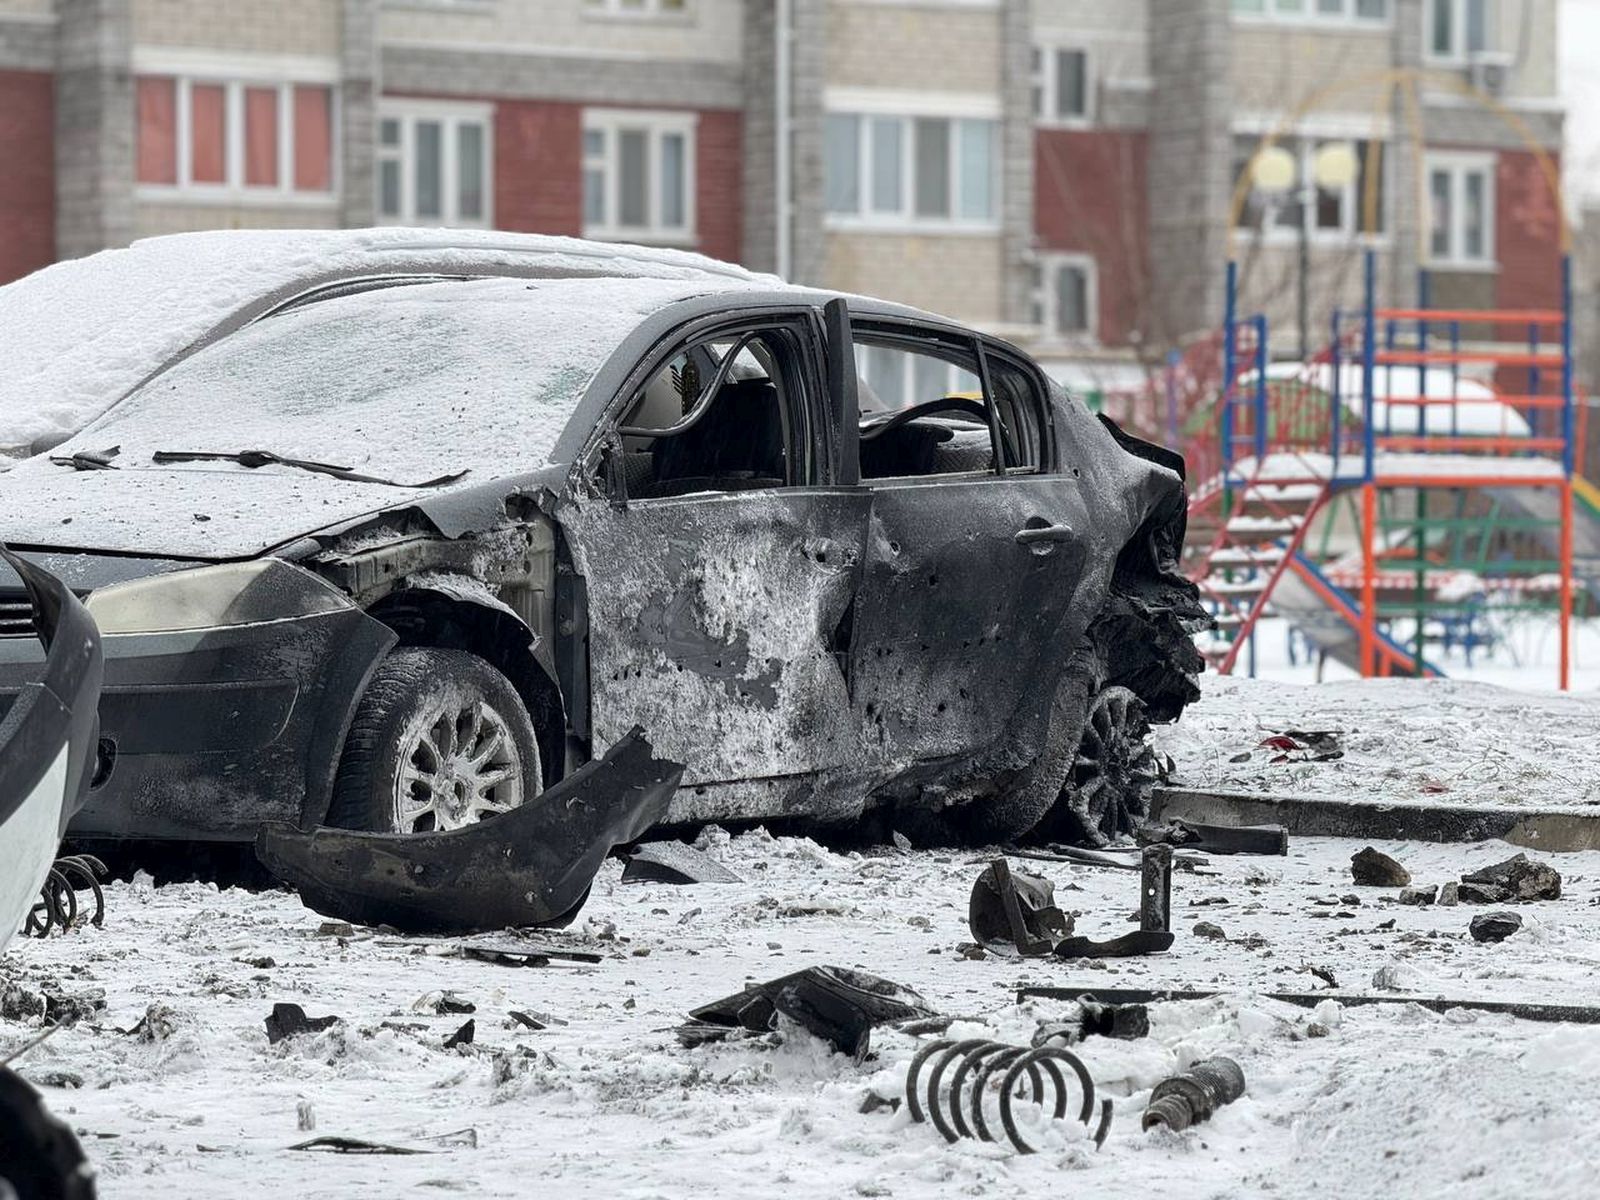 epa11059013 A handout image made available by the official telegram channel of the Belgorod region governor Vyacheslav Gladkov shows destroyed cars after shelling in Belgorod, Russia, 05 January 2024. Two people were injured due to shelling by the Ukrainian Armed Forces, the Mayor of Belgorod Valentin Demidov wrote on telegram. On 24 February 2022, Russian troops entered Ukrainian territory in what the Russian president declared a 'special military operation', starting an armed conflict that has provoked destruction and a humanitarian crisis.  EPA/BELGOROD REGION GOVERNOR MANDATORY CREDIT / HANDOUT EDITORIAL USE ONLY/NO SALES HANDOUT EDITORIAL USE ONLY/NO SALES HANDOUT EDITORIAL USE ONLY/NO SALES